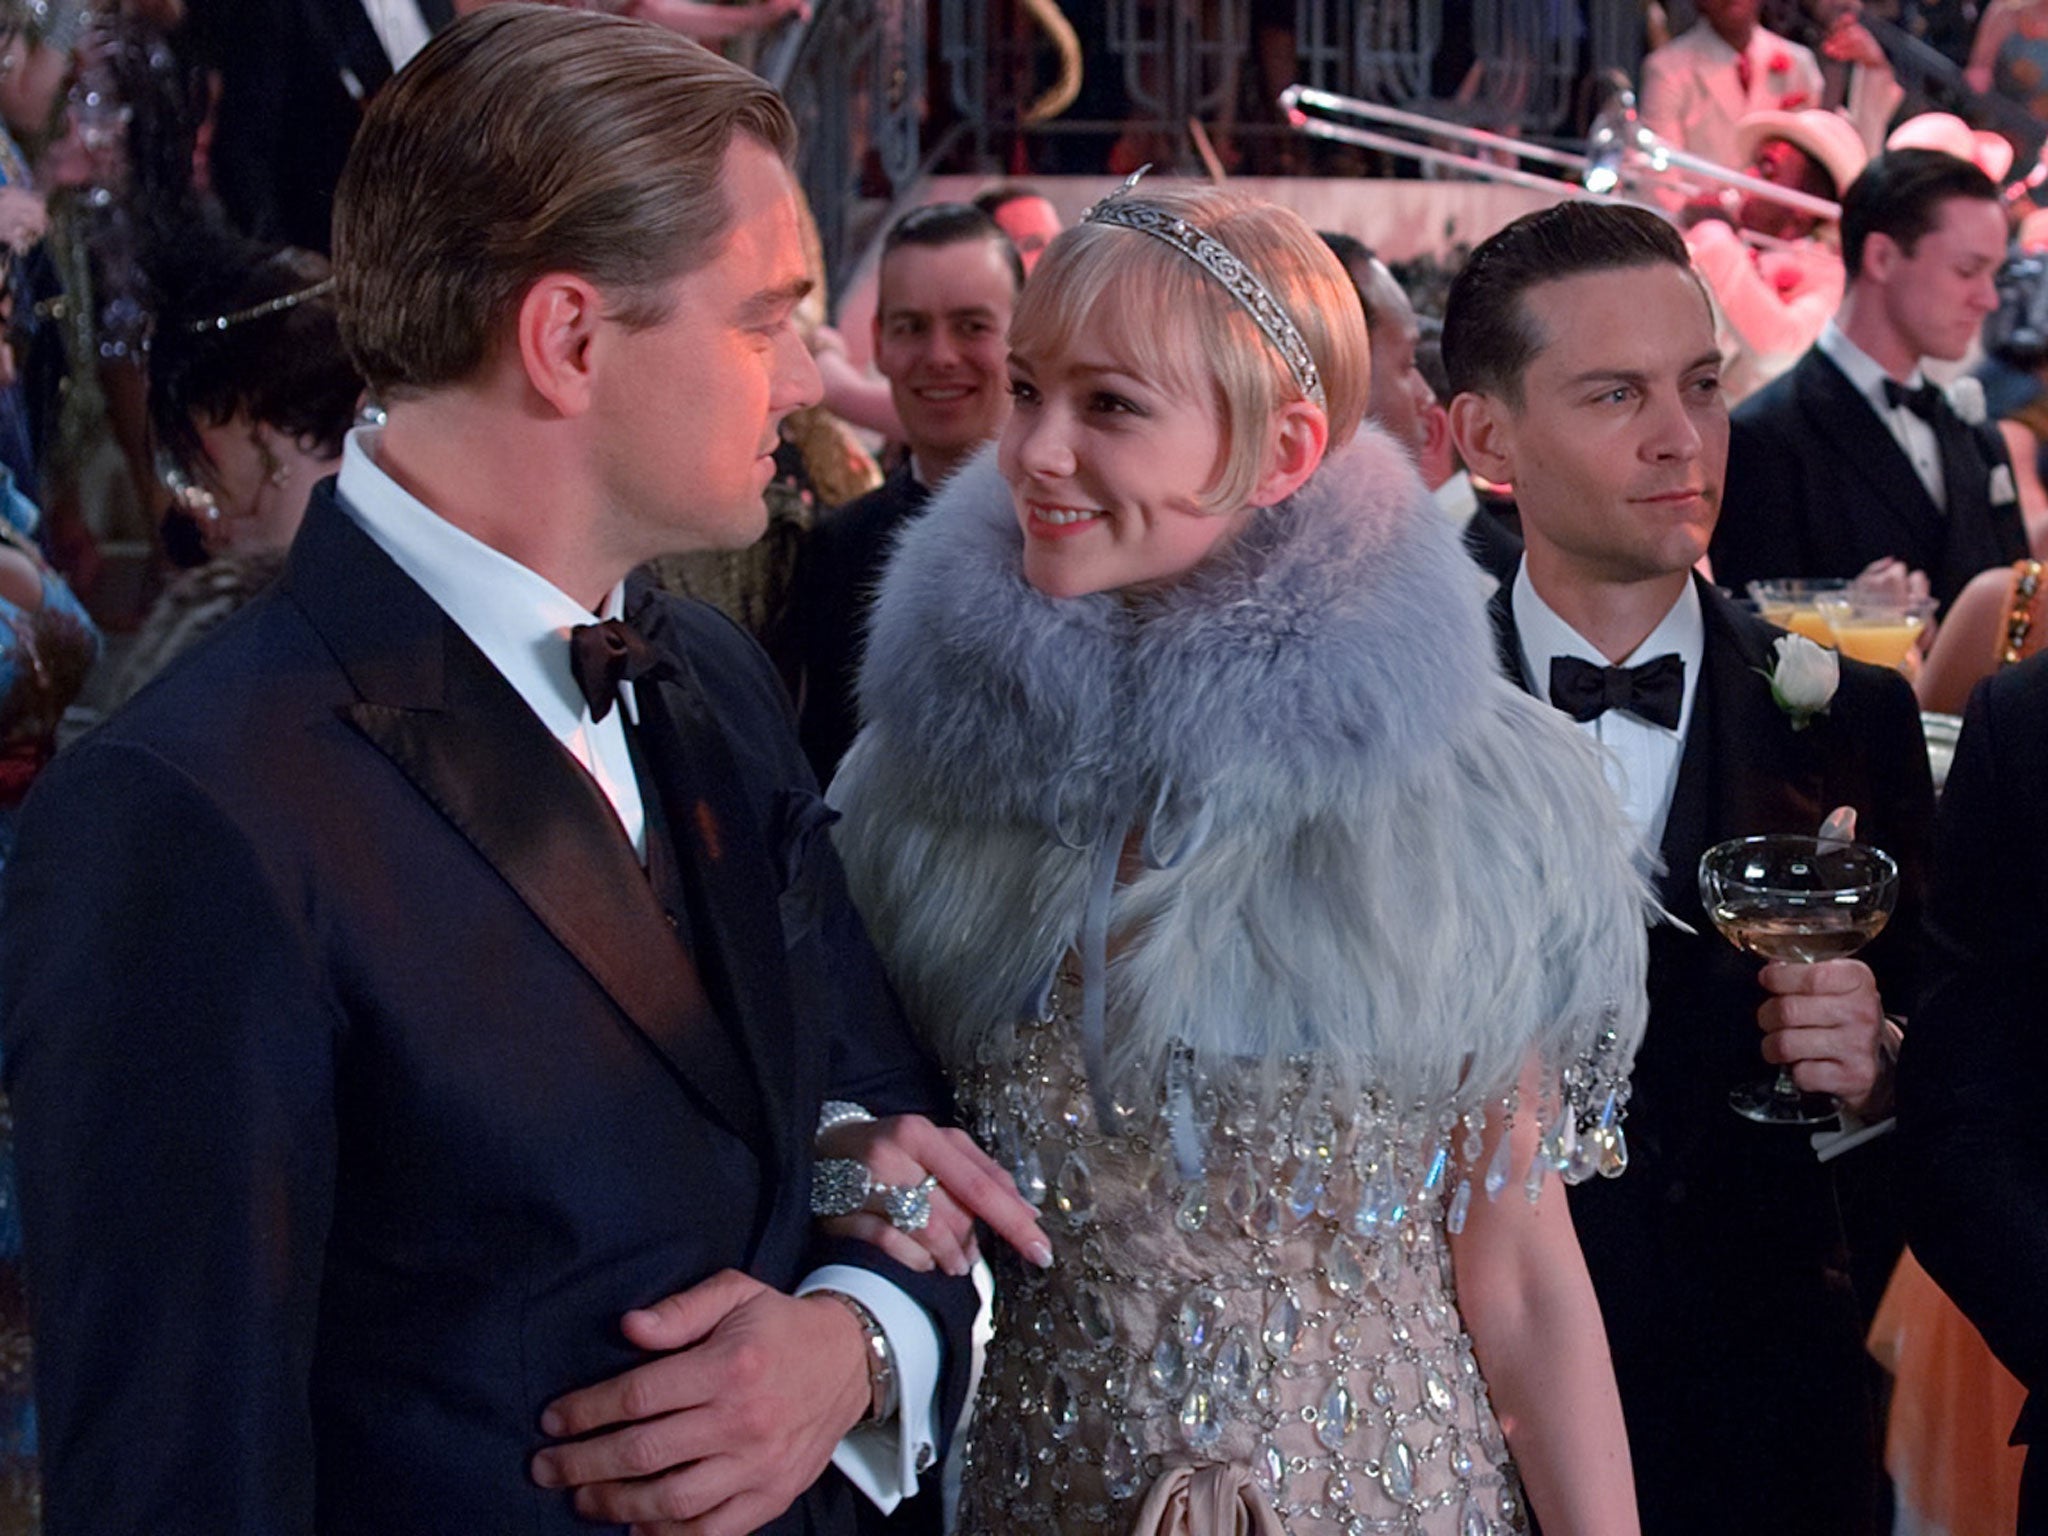 Film/Book Review: The Great Gatsby - Writers & Books